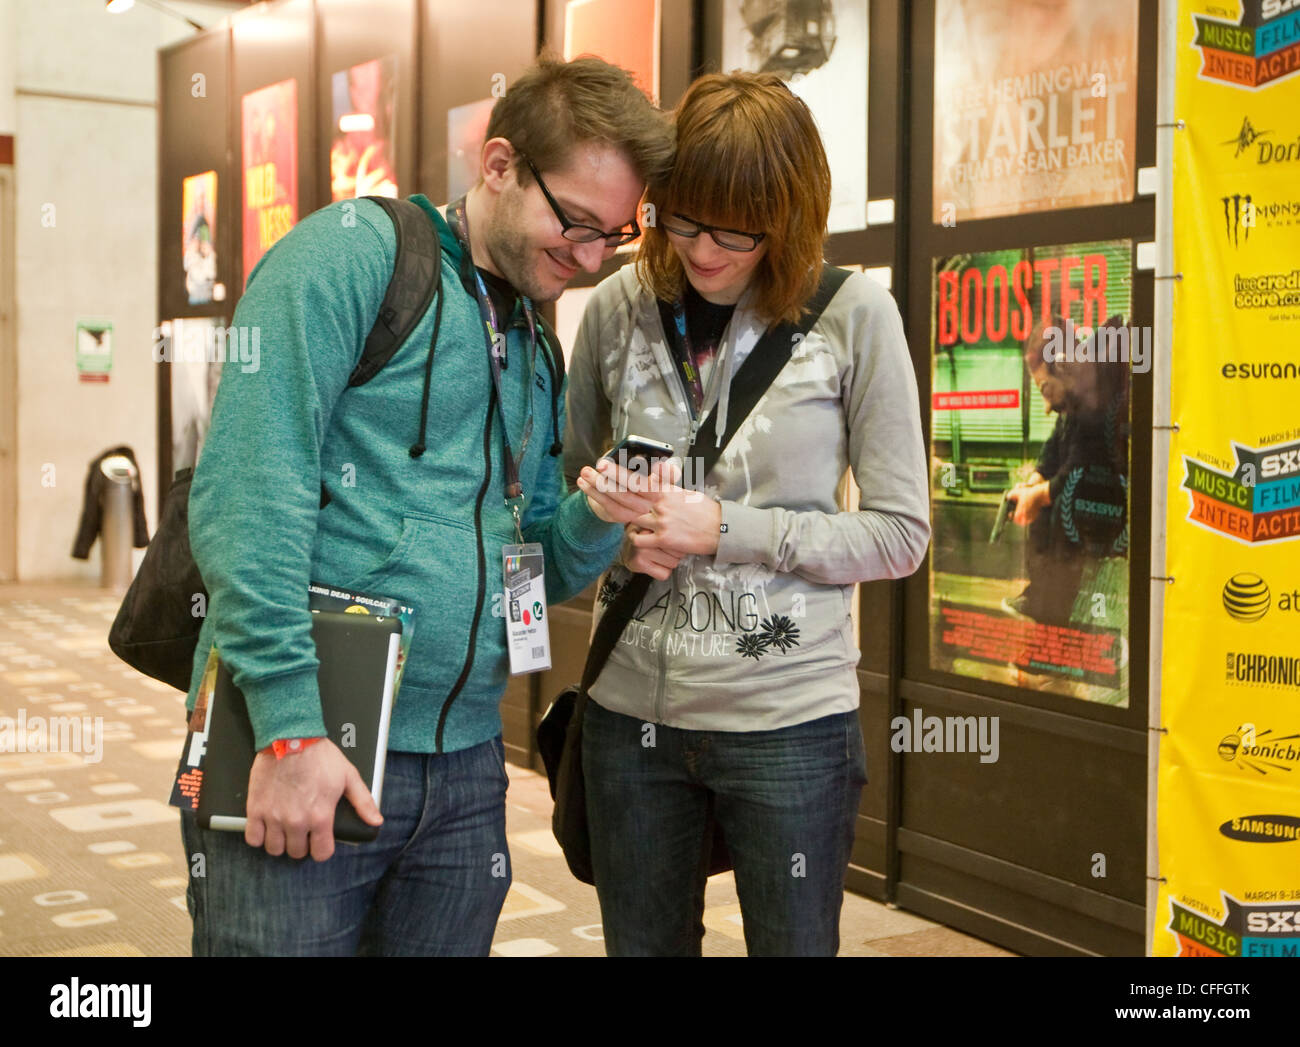 March 12th, 2012 Austin, Texas : SXSW Interactive convention draws thousands of tech-savvy attendees. Stock Photo